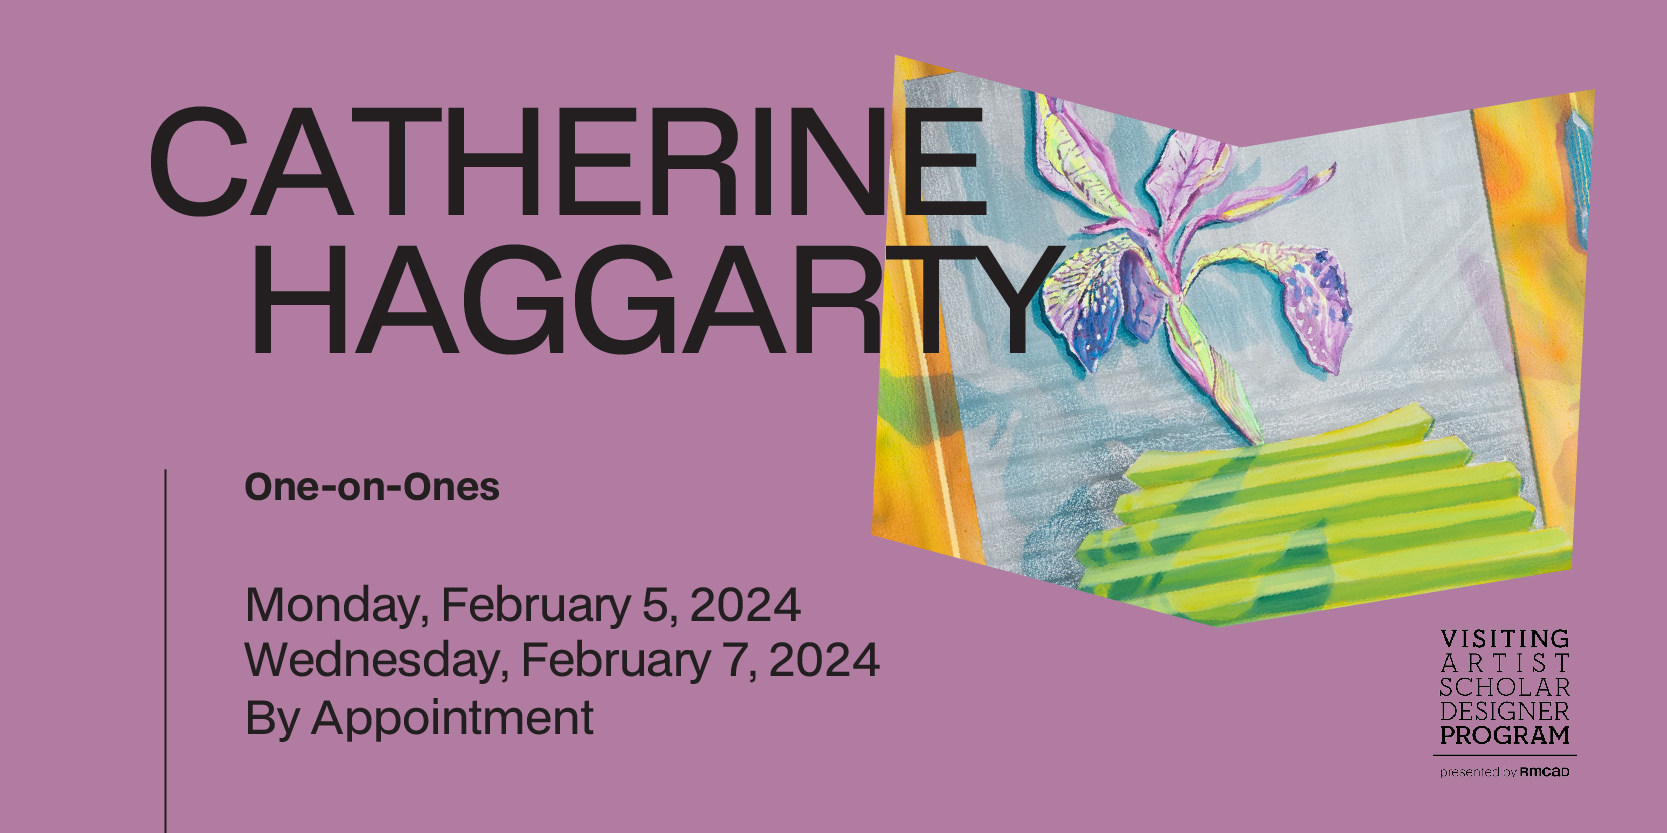 One-on-Ones with Catherine Haggarty